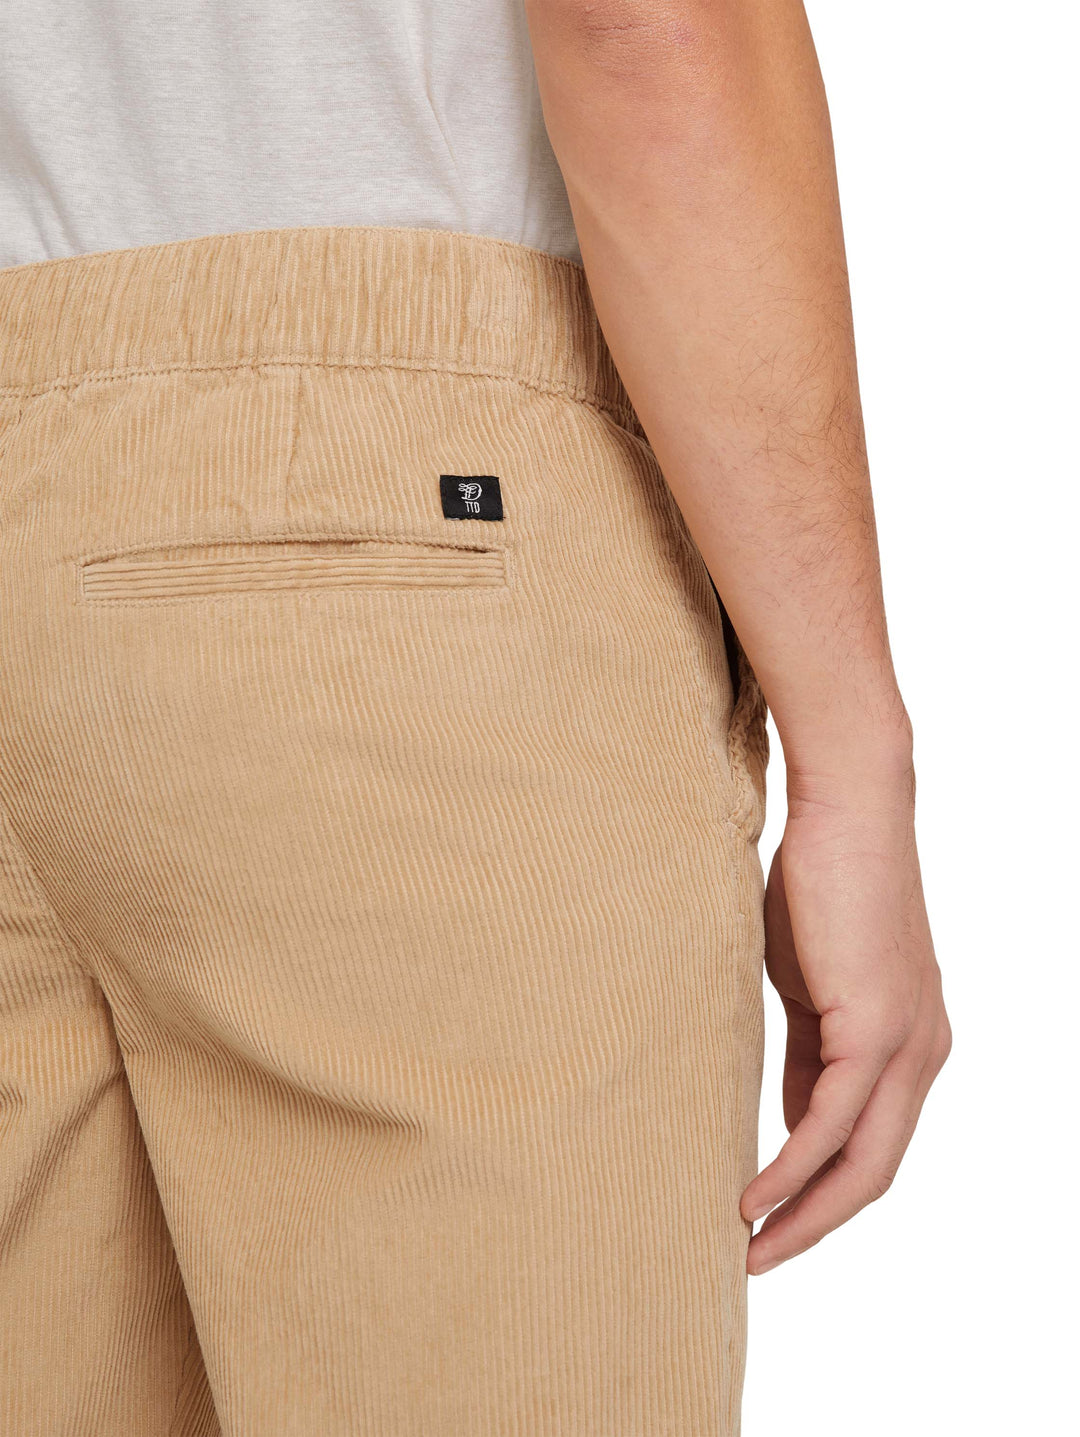 RELAXED CORDUROY JOGGER